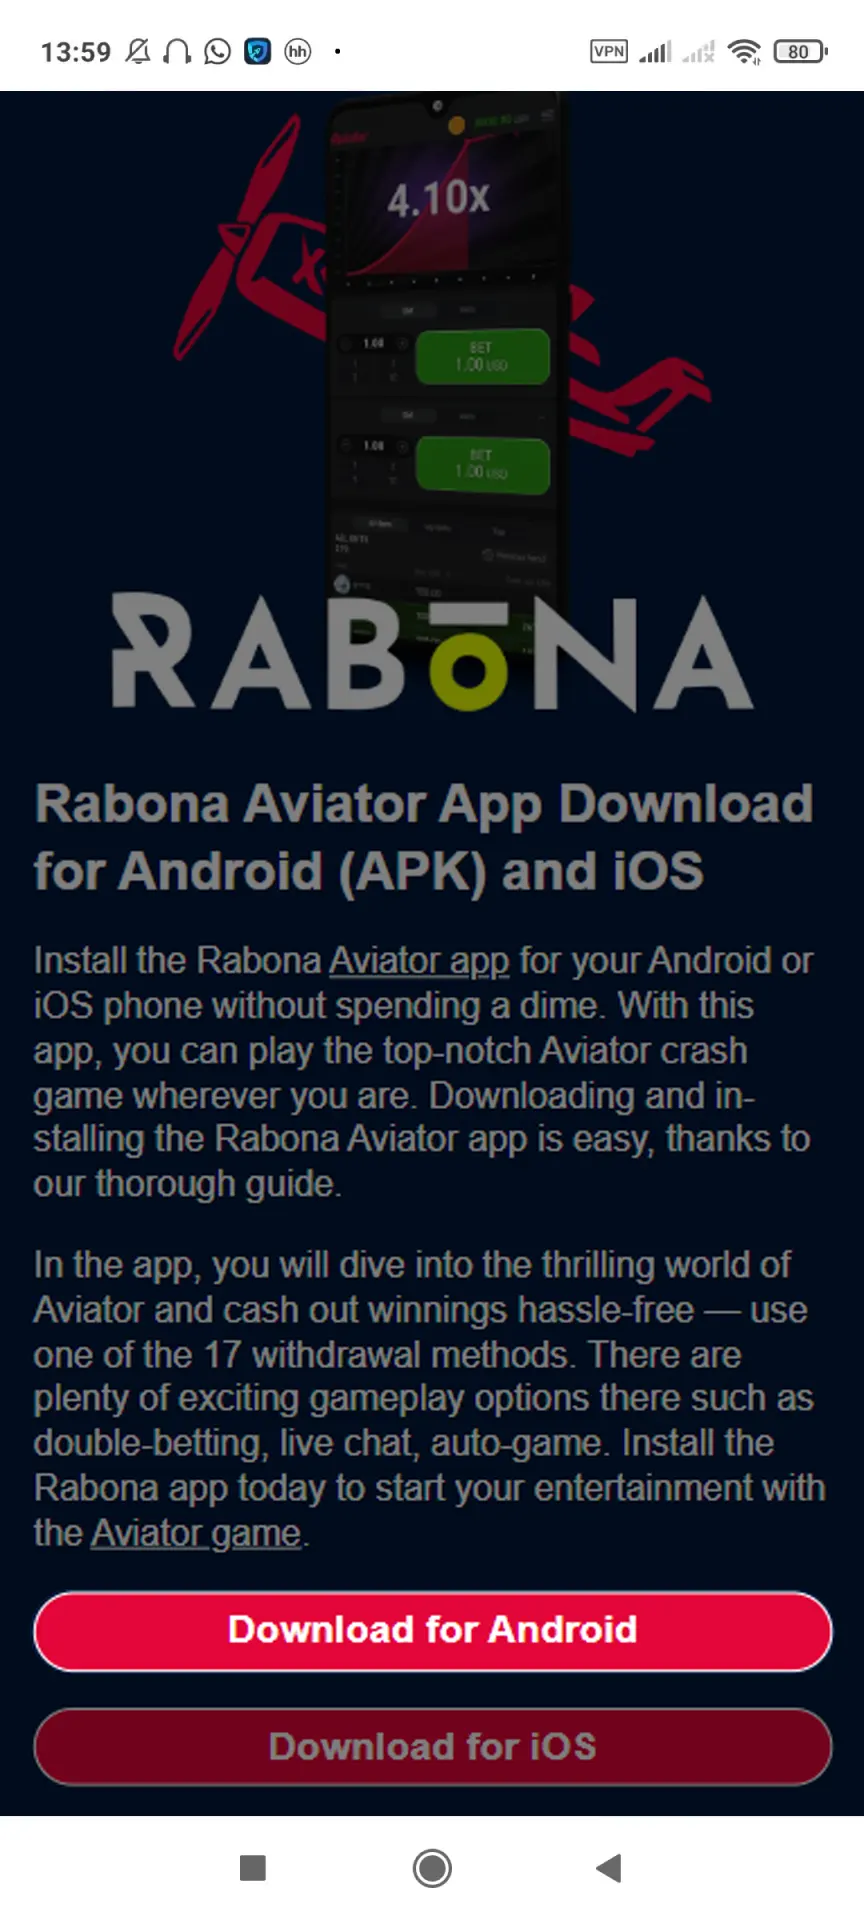 Enter on the Android app download page.